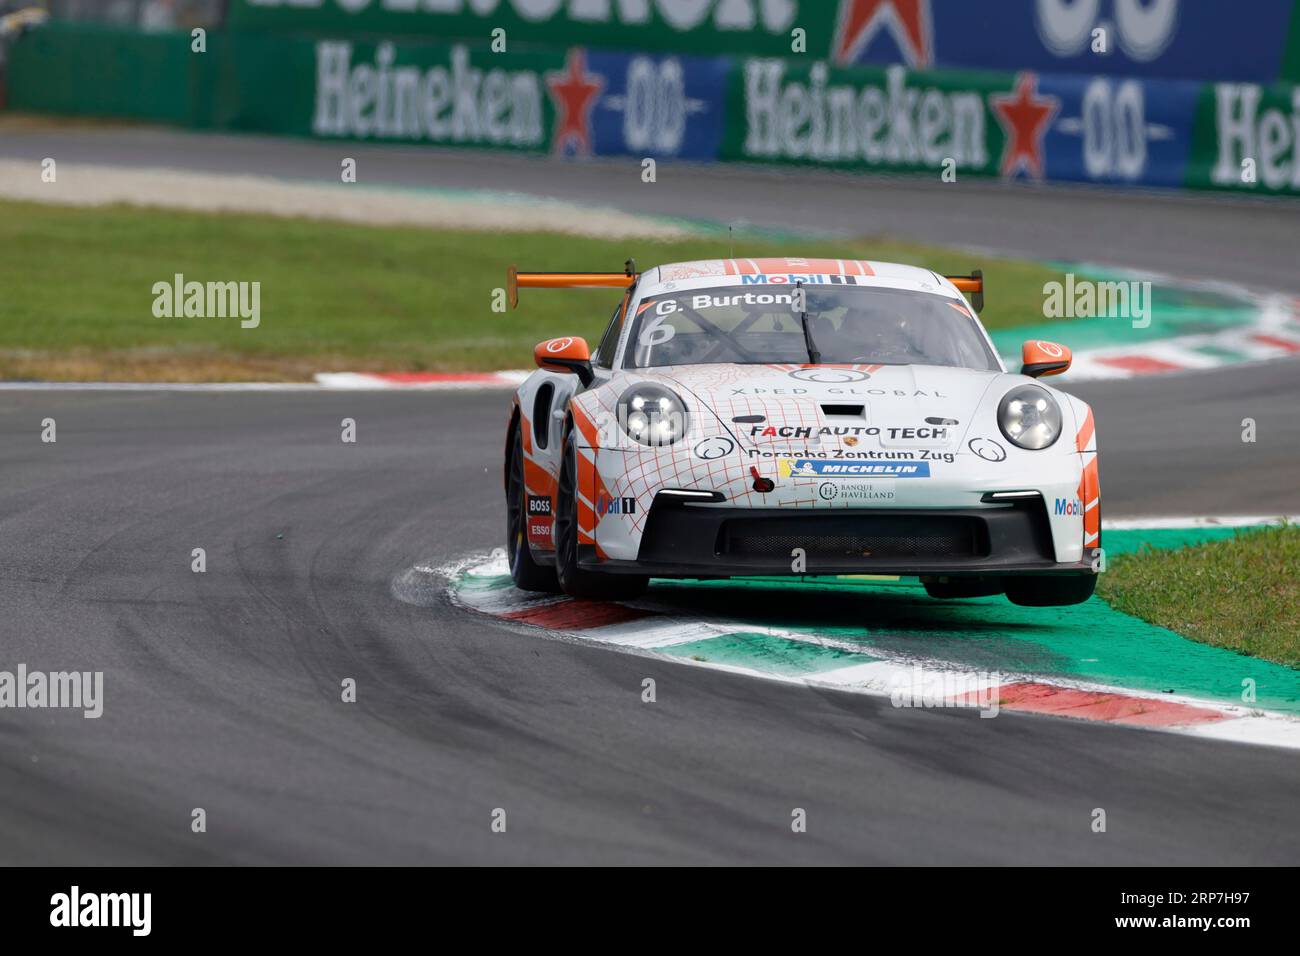 Monza, Italy. 2nd Sep, 2023. #6 Gustav Burton (UK, Fach Auto Tech), Porsche Mobil 1 Supercup at Autodromo Nazionale Monza on September 2, 2023 in Monza, Italy. (Photo by HIGH TWO) Credit: dpa/Alamy Live News Stock Photo